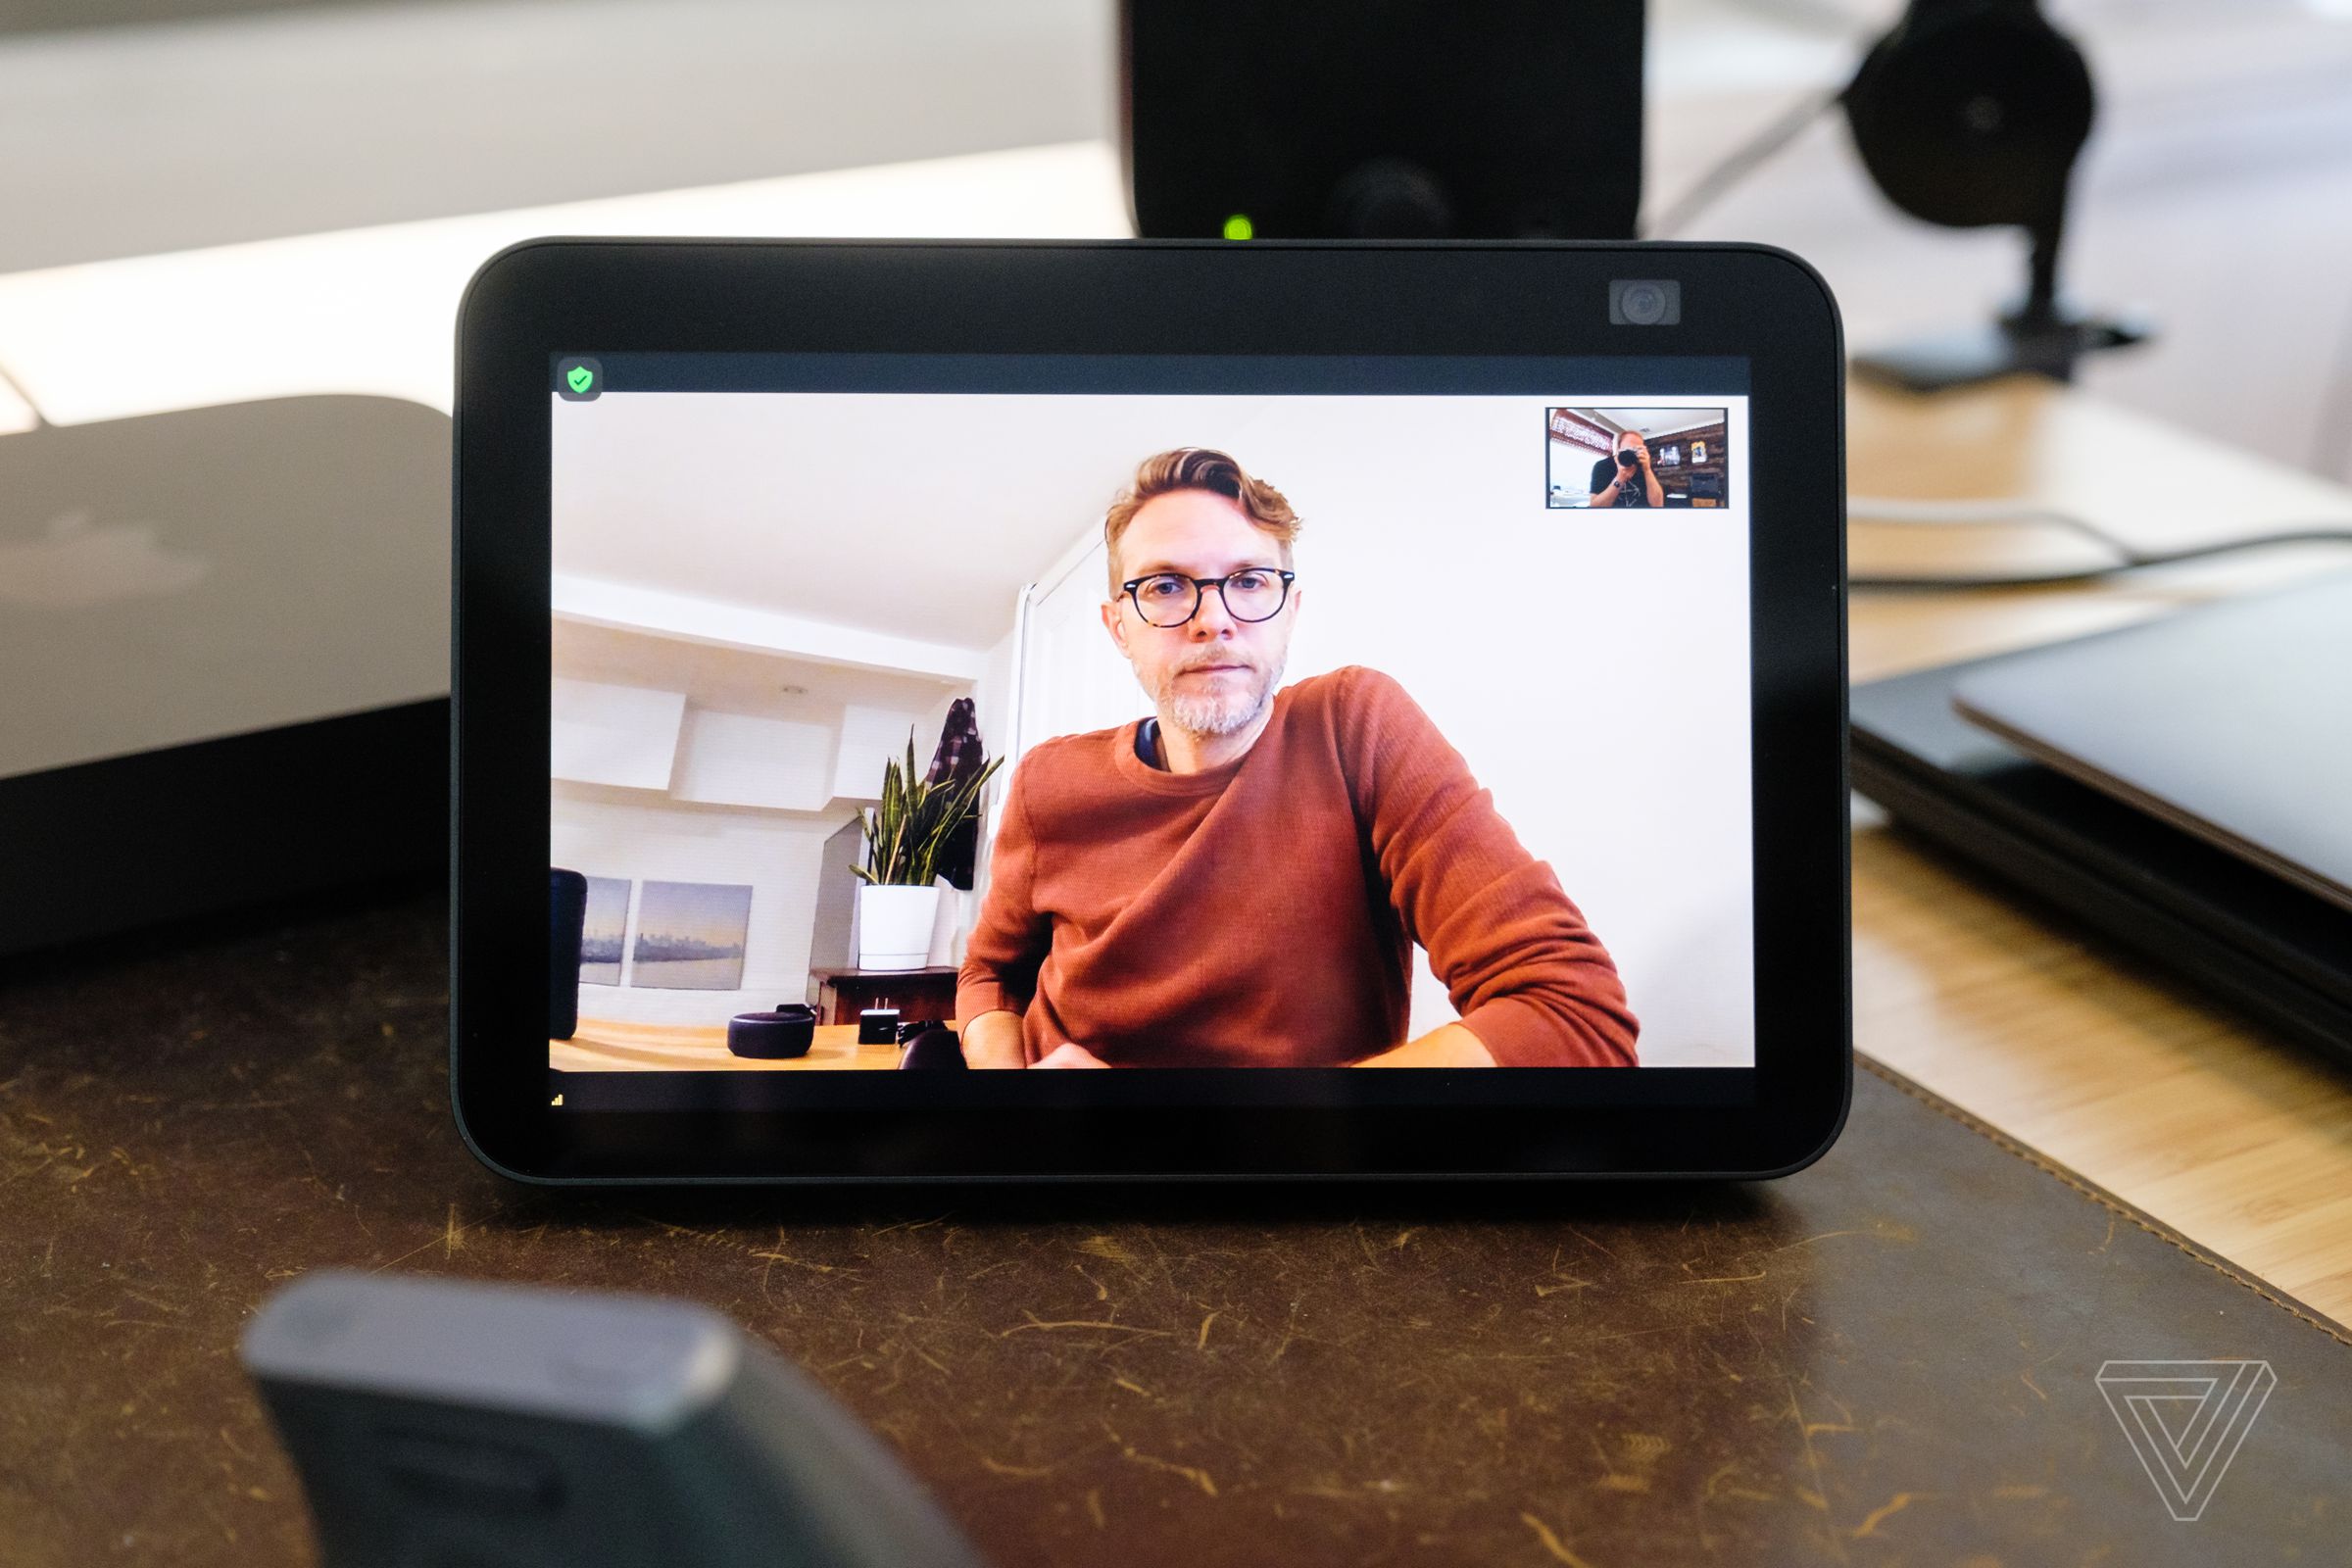 You can use the Echo Show 8 for Zoom calls, but it works best for one-on-one calling, not groups